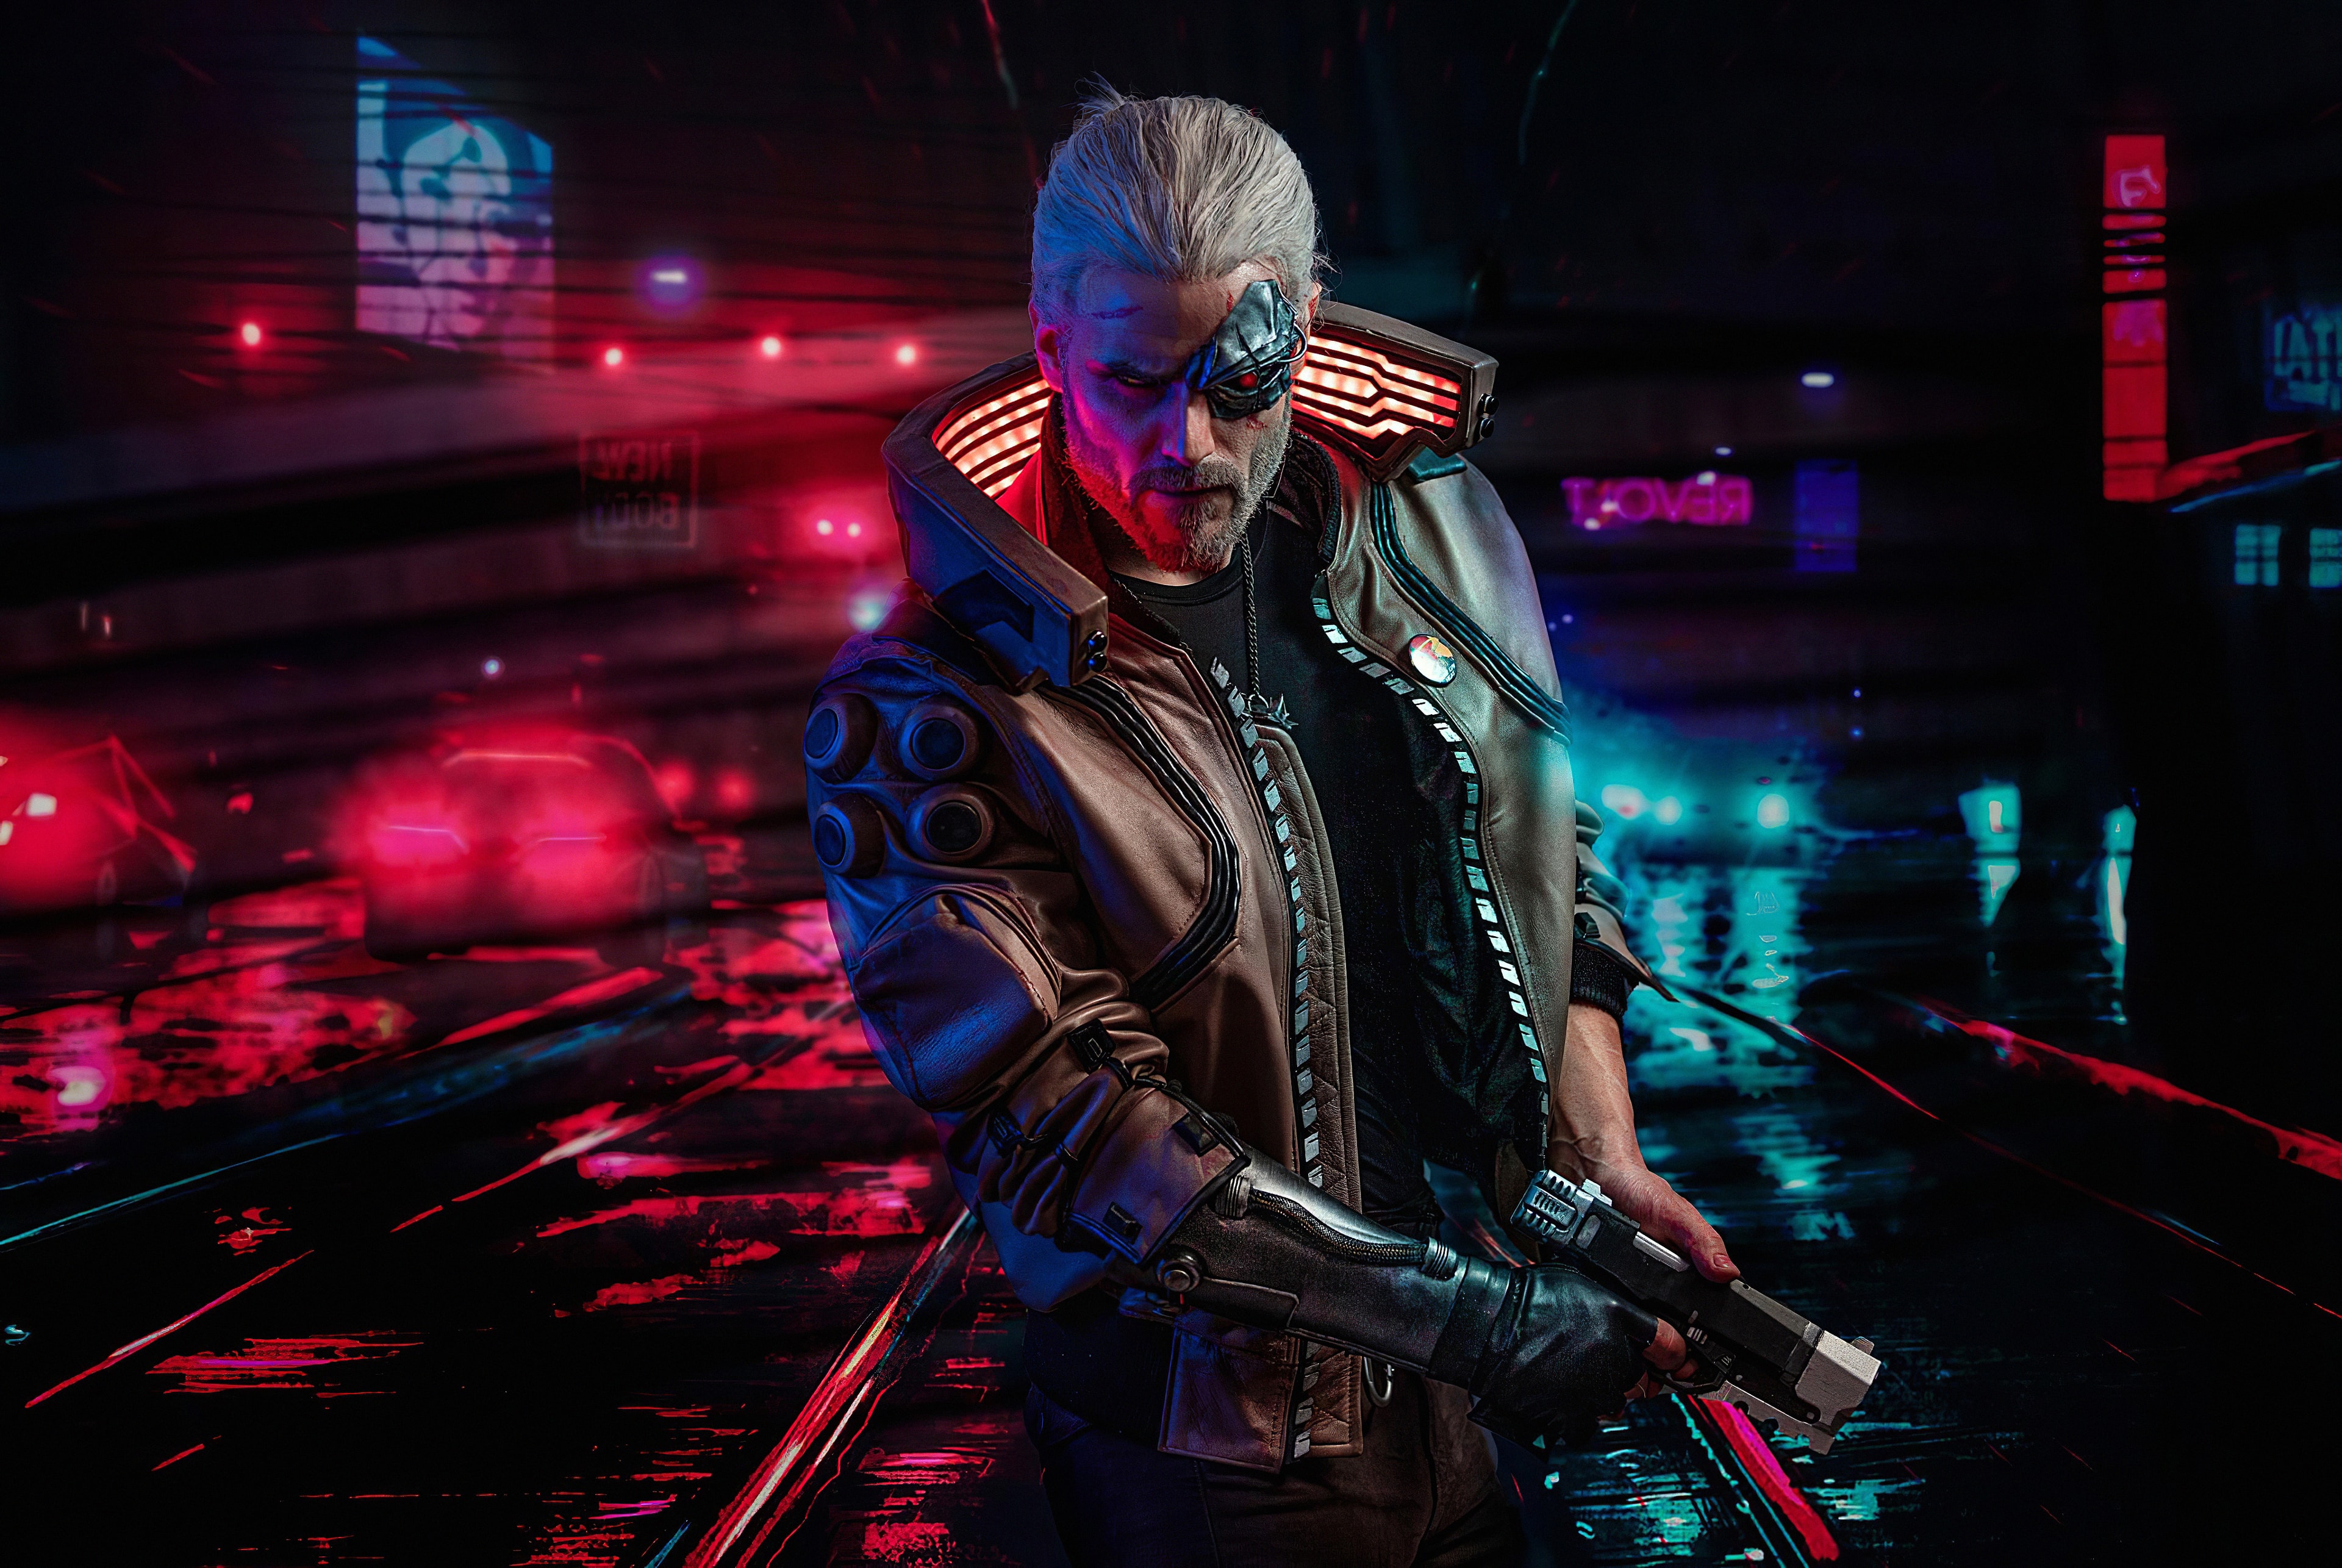 2020 4k Cyberpunk 2077 Wallpaper,HD Games Wallpapers,4k Wallpapers,Images, Backgrounds,Photos and Pictures